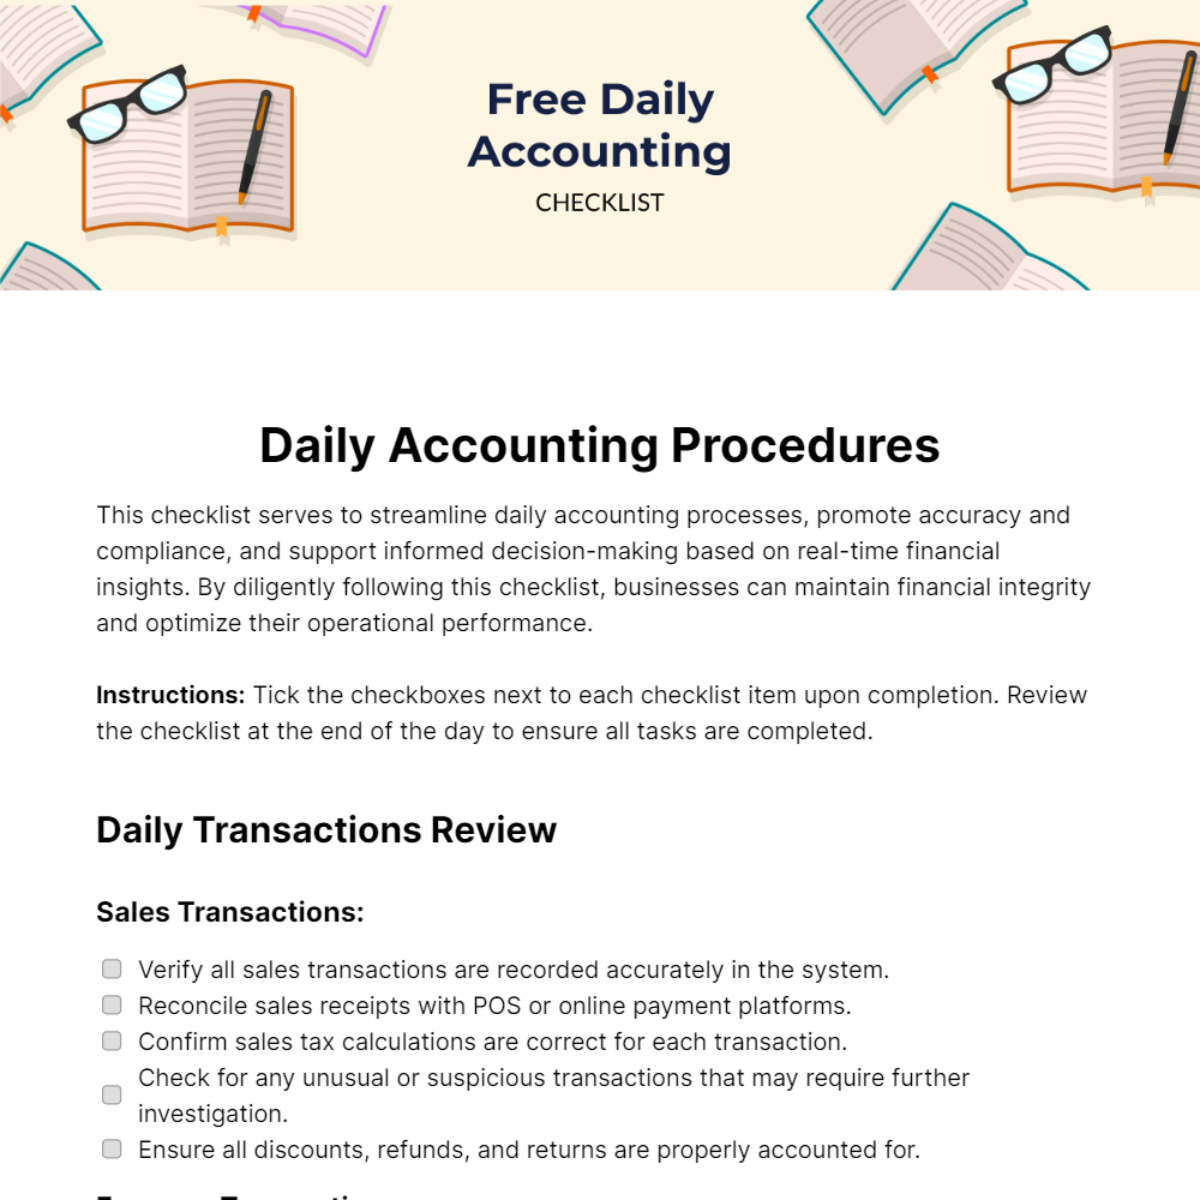 Daily Accounting Checklist Template